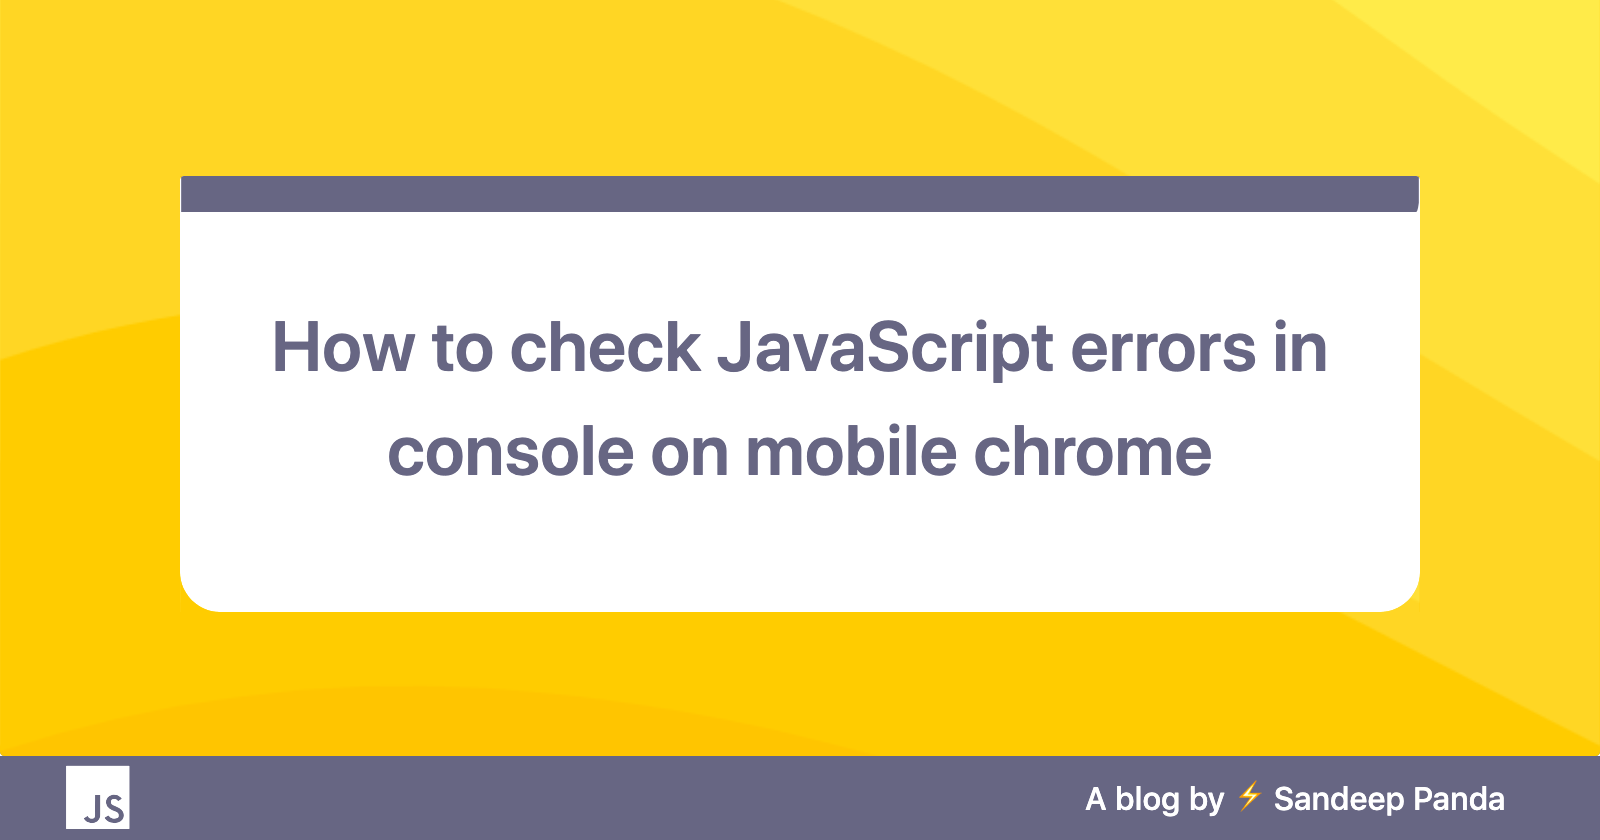 How to check JavaScript errors in console on mobile chrome